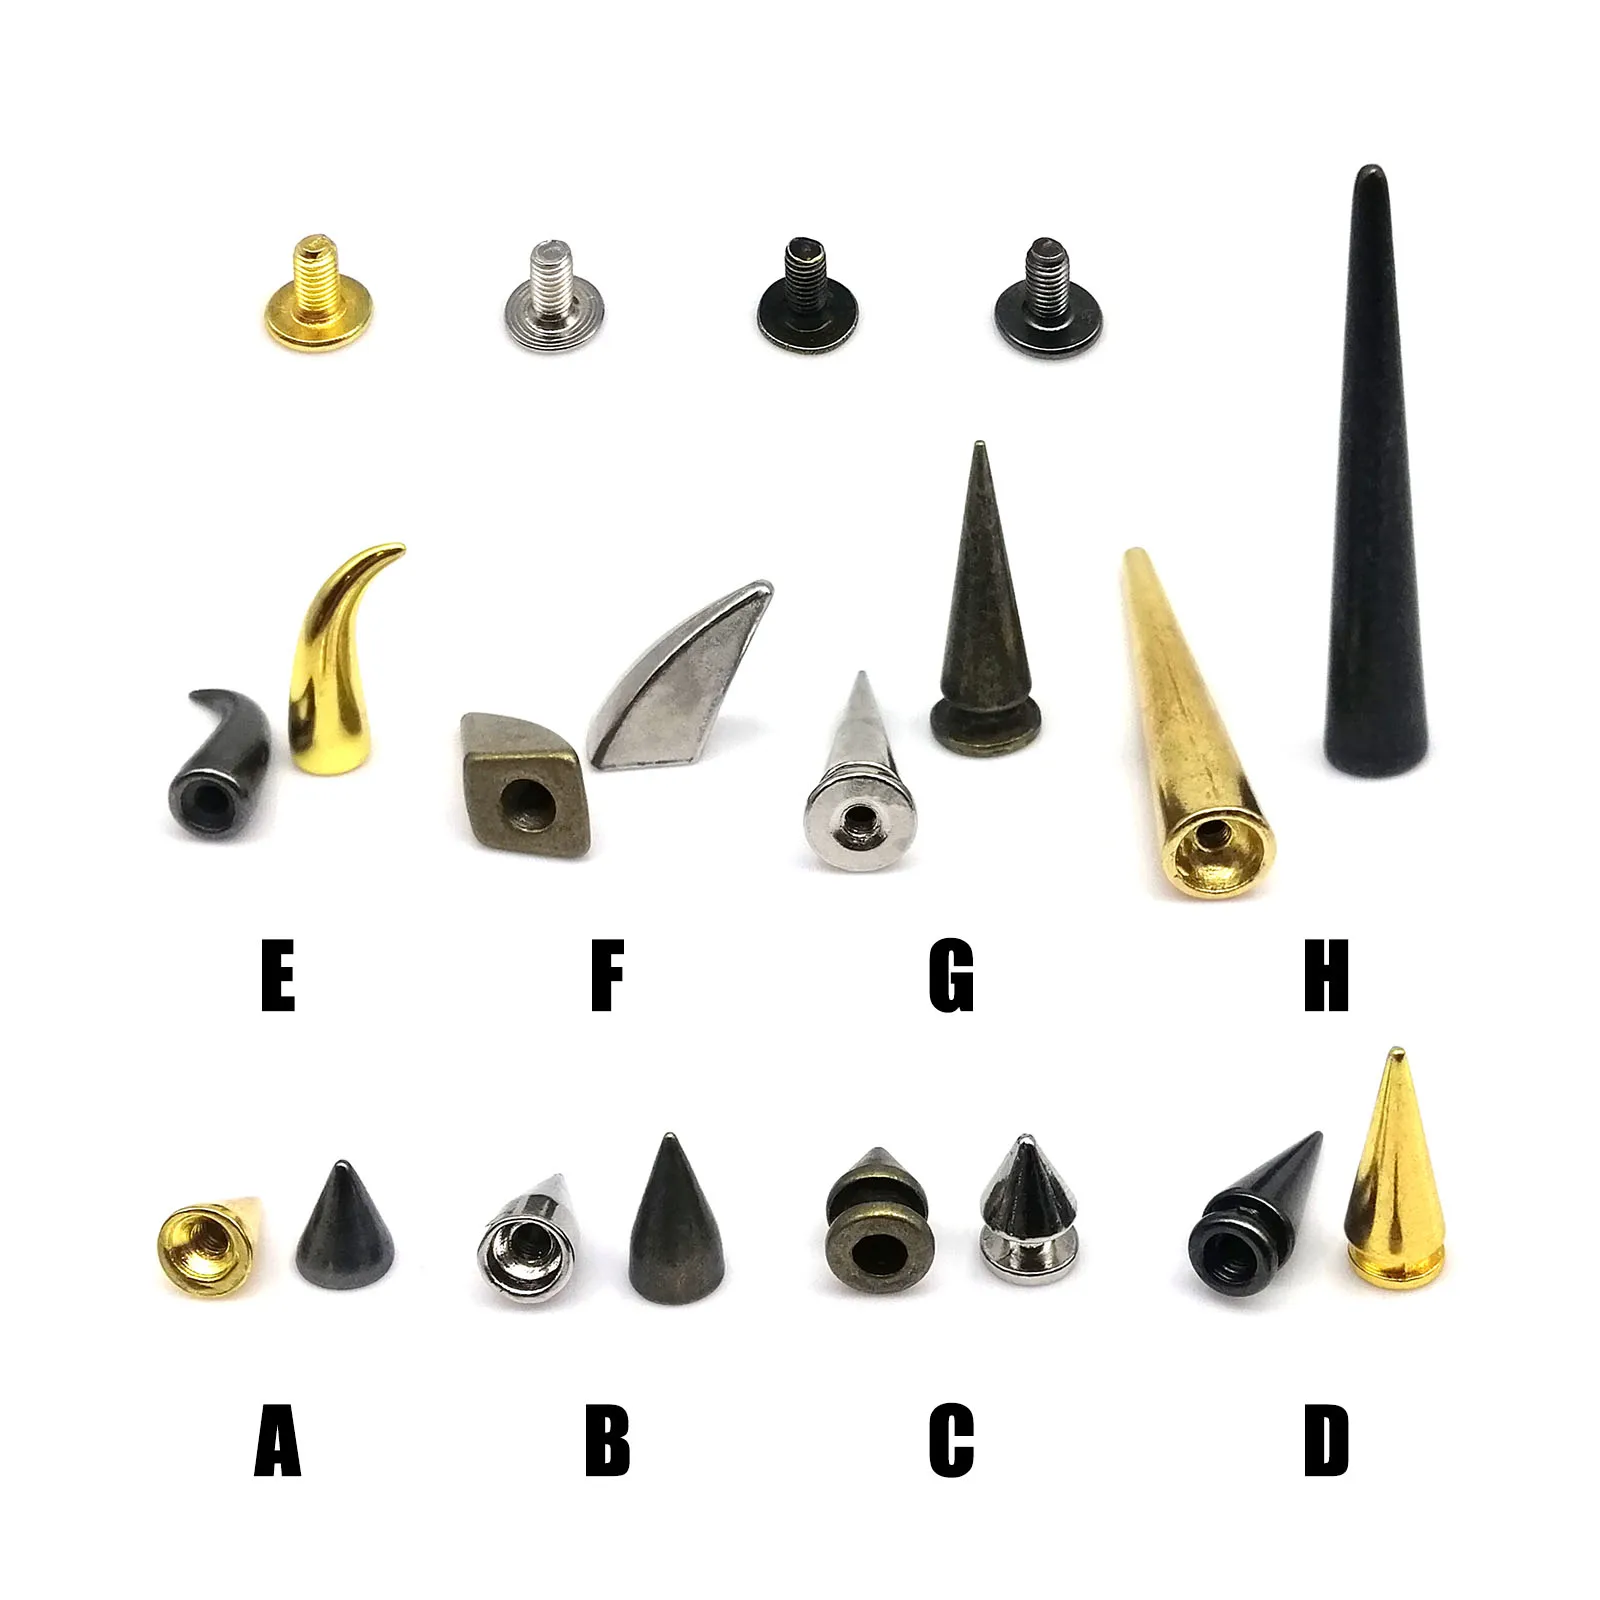 150 Sets ABS Plastic Punk Cone Spikes Studs Multiple Sizes Silver Screw  Back Spikes Studs Rock Bullet Rivets for Punk Rock Style Clothing  Accessories